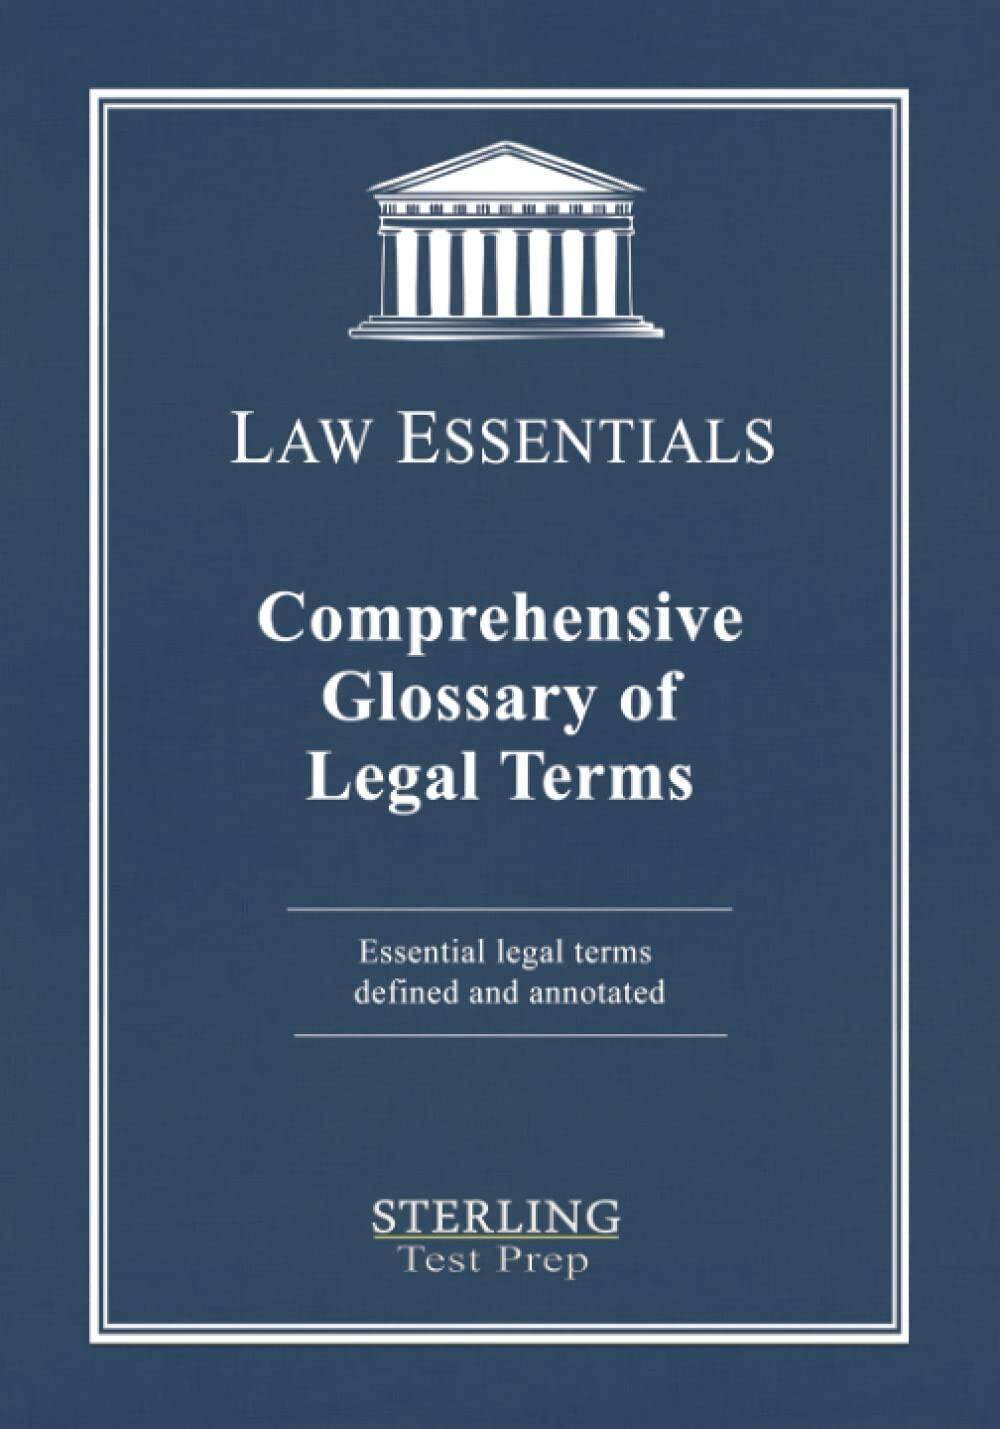 Comprehensive Glossary of Legal Terms, Law Essentials: Essential Legal Terms Defined and Annotated (Law Essentials: Governing Law)